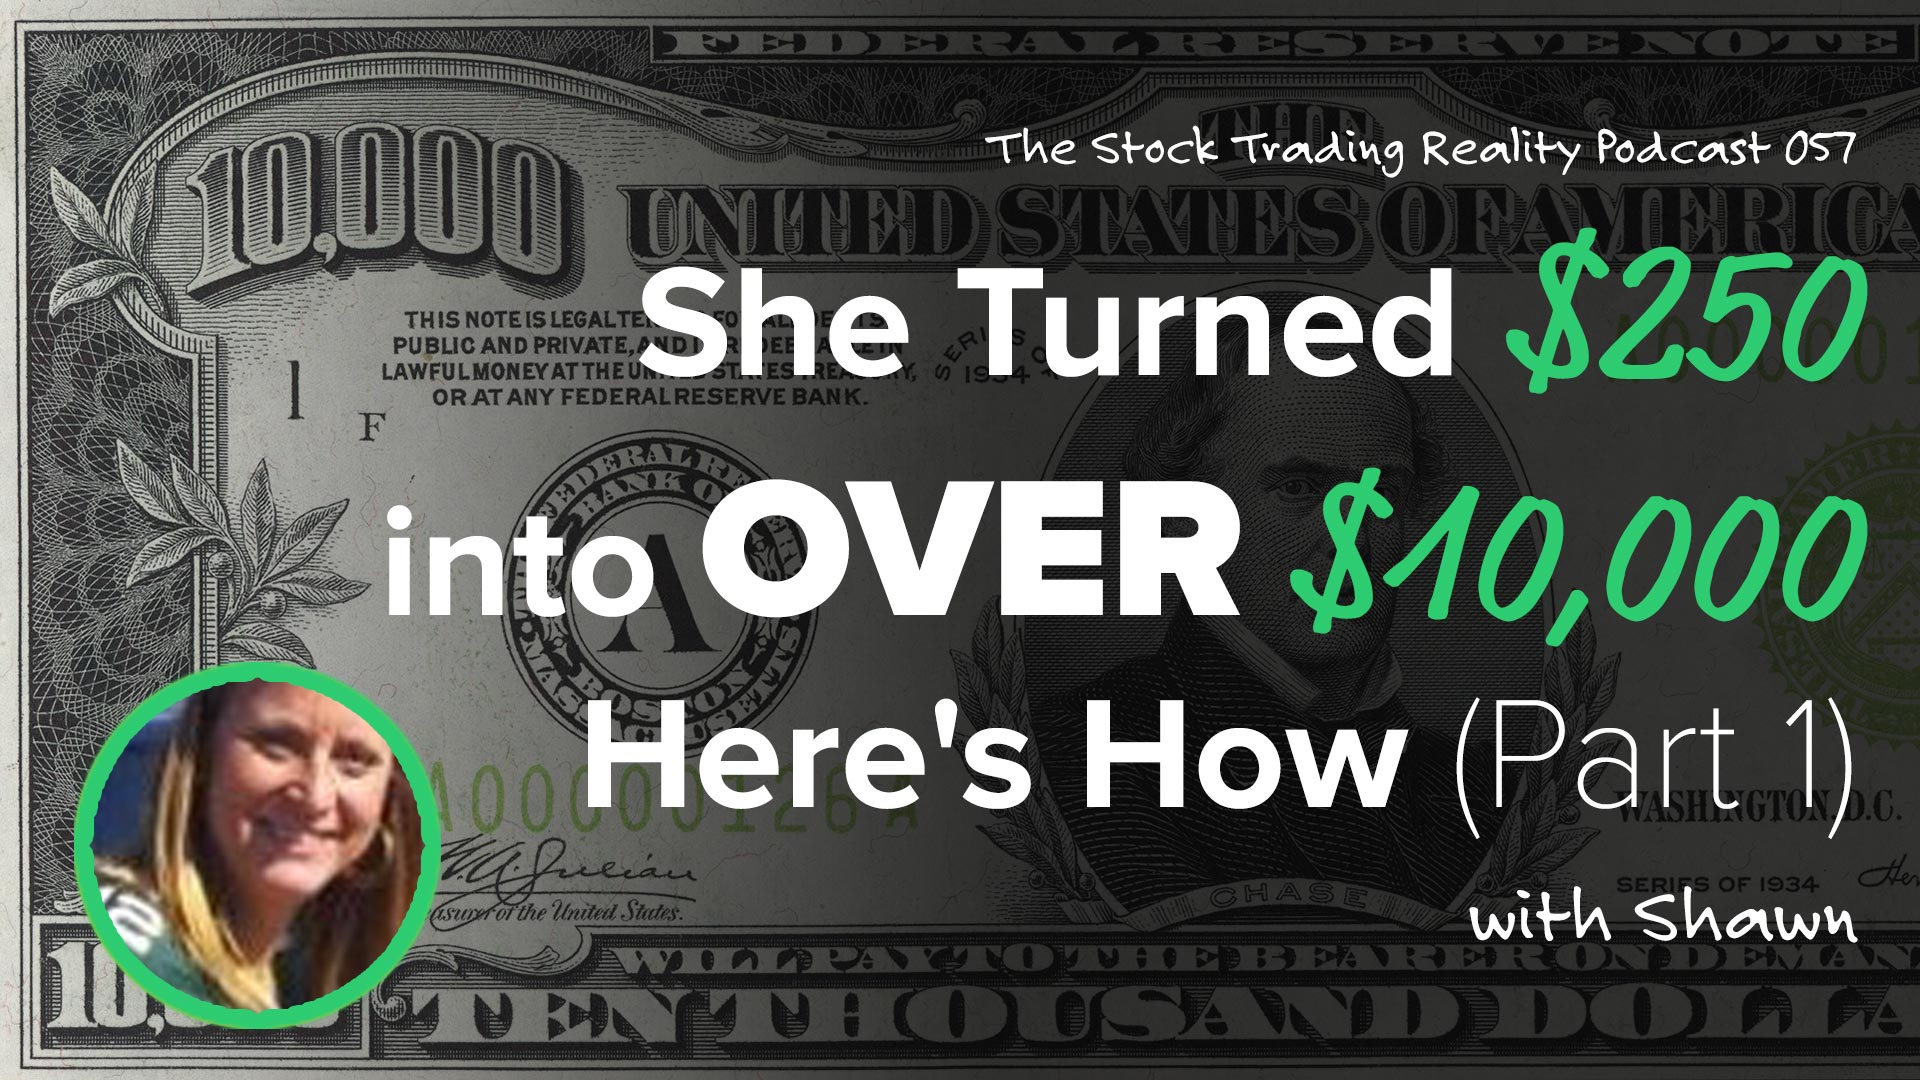 STR 057: She Turned $250 into Over $10,000. Here's How.